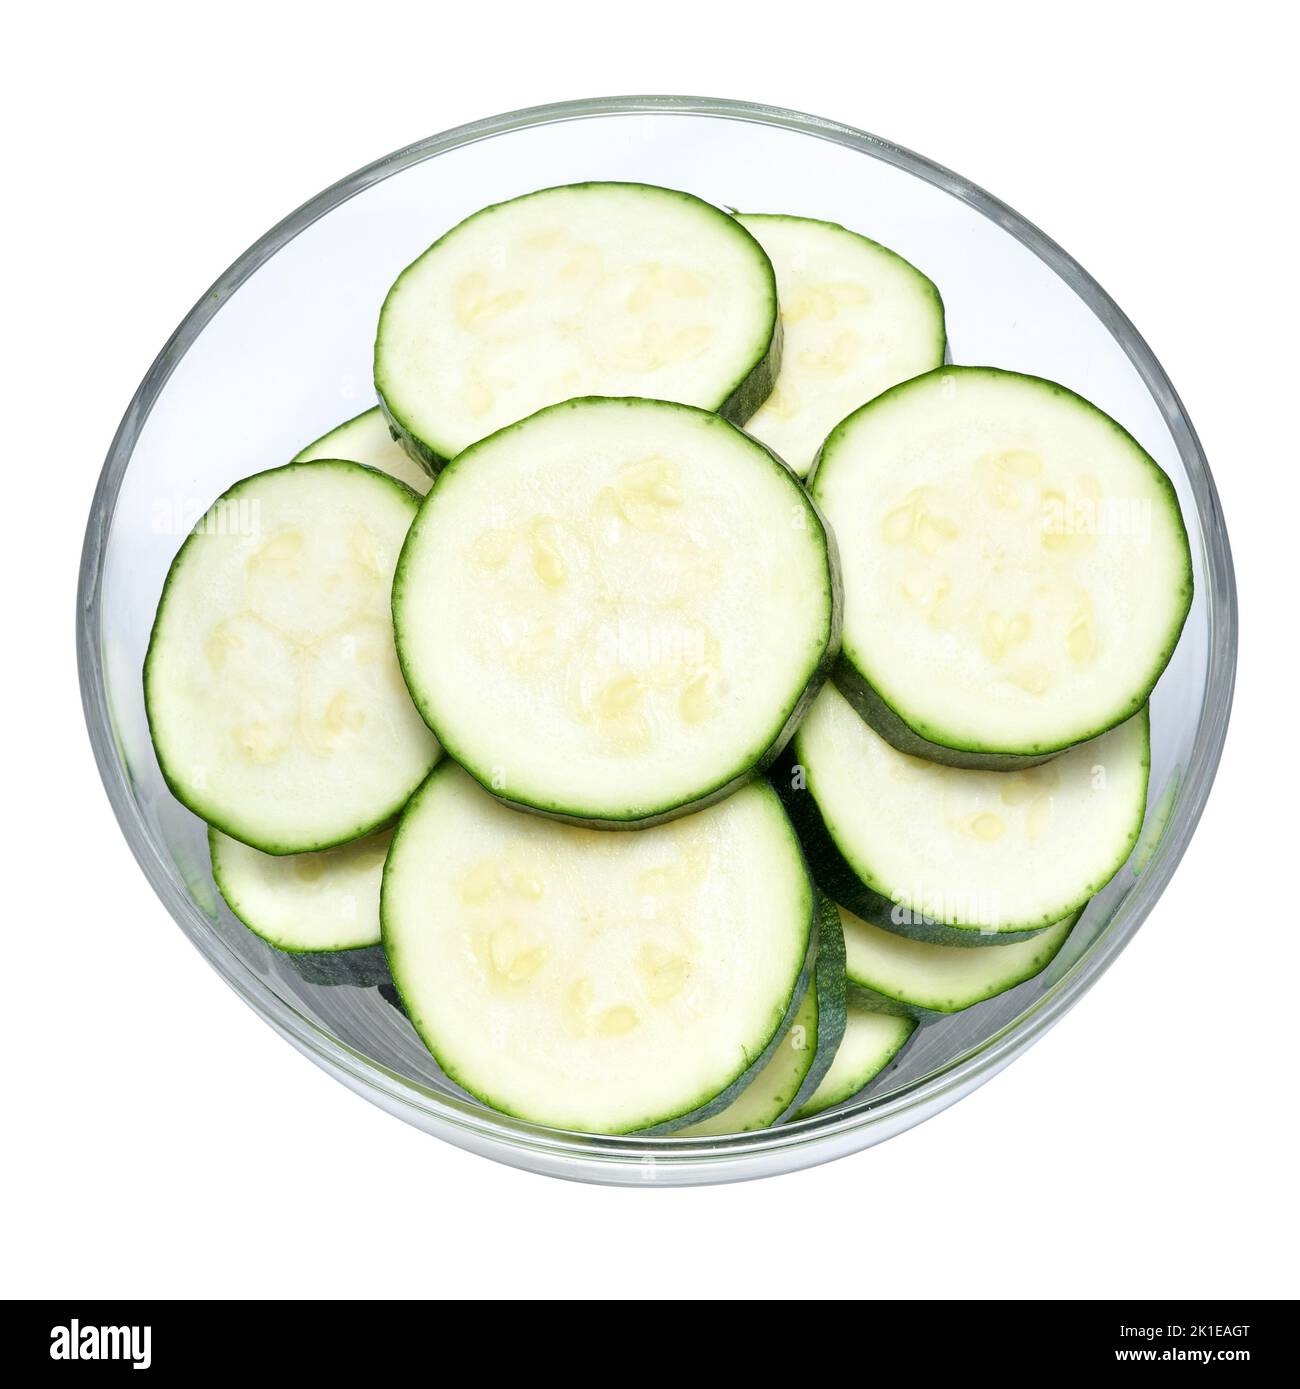 Sliced zucchini circles in glass bowl isolated on white background Stock Photo